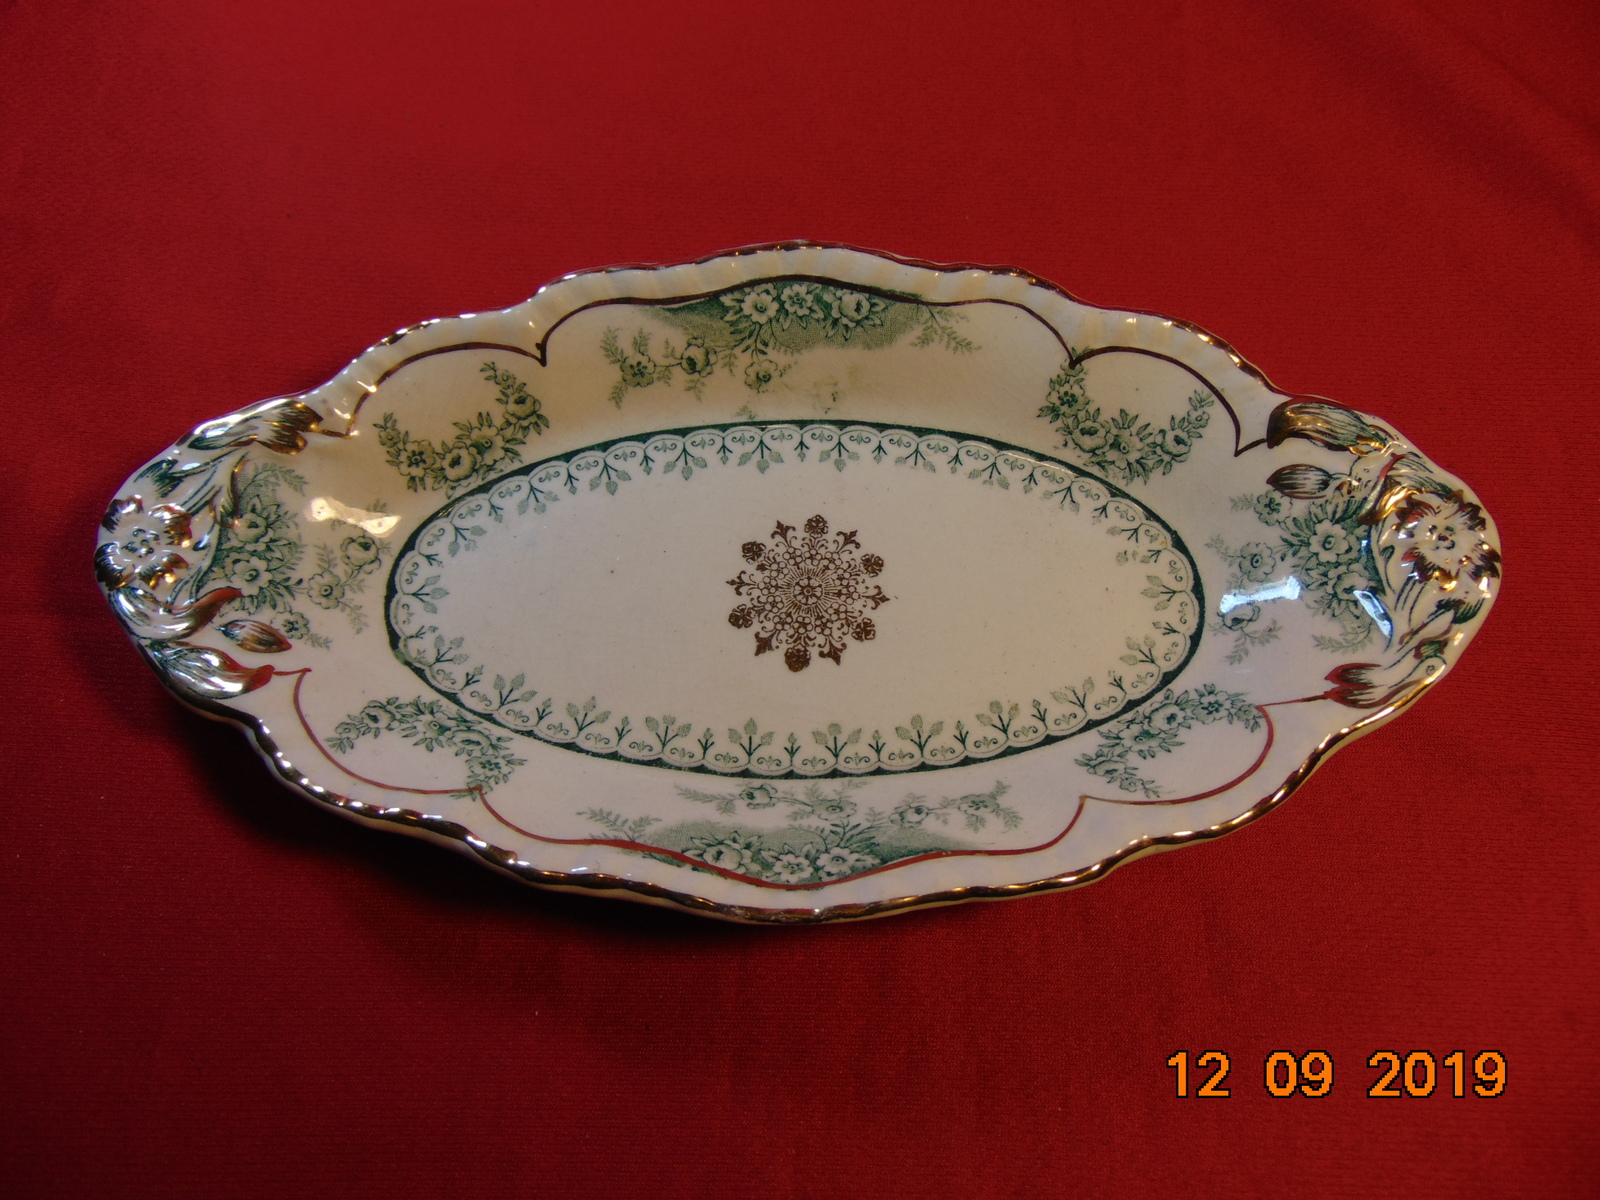 8 3/4" Oval (8 3/4" by 4 1/4")  Relish Dish, from John Maddock & Sons, in the Wa - $14.99